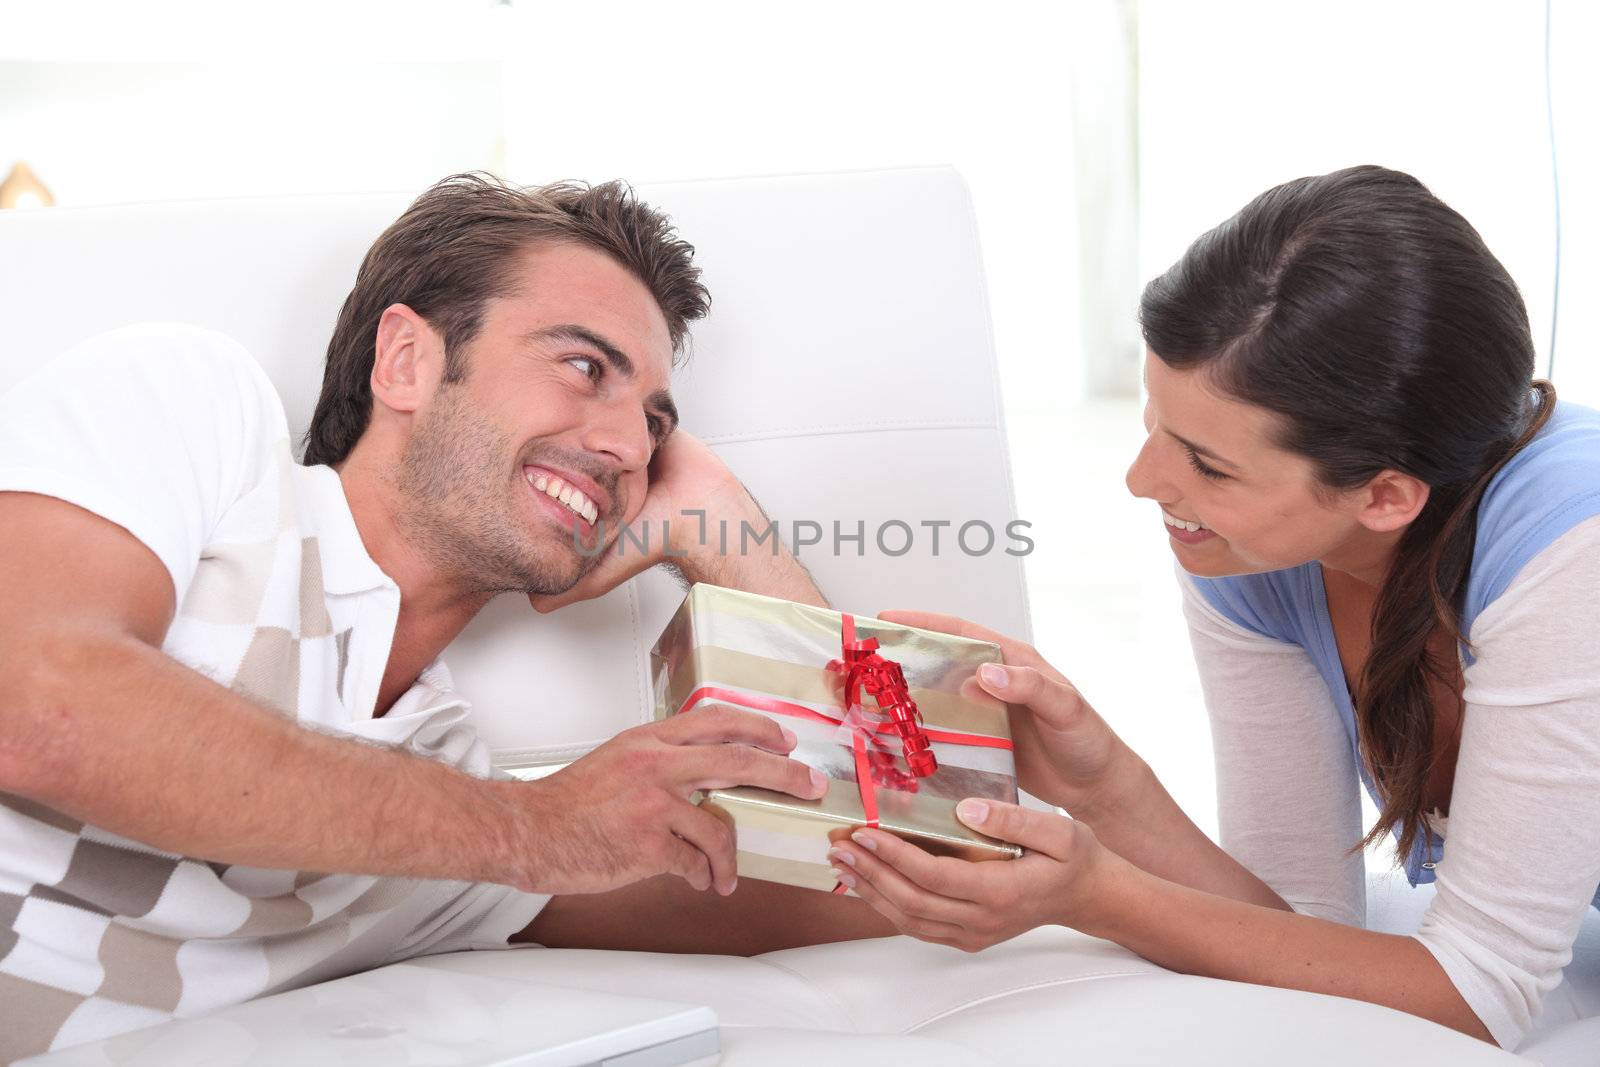 Man offering gift to woman by phovoir